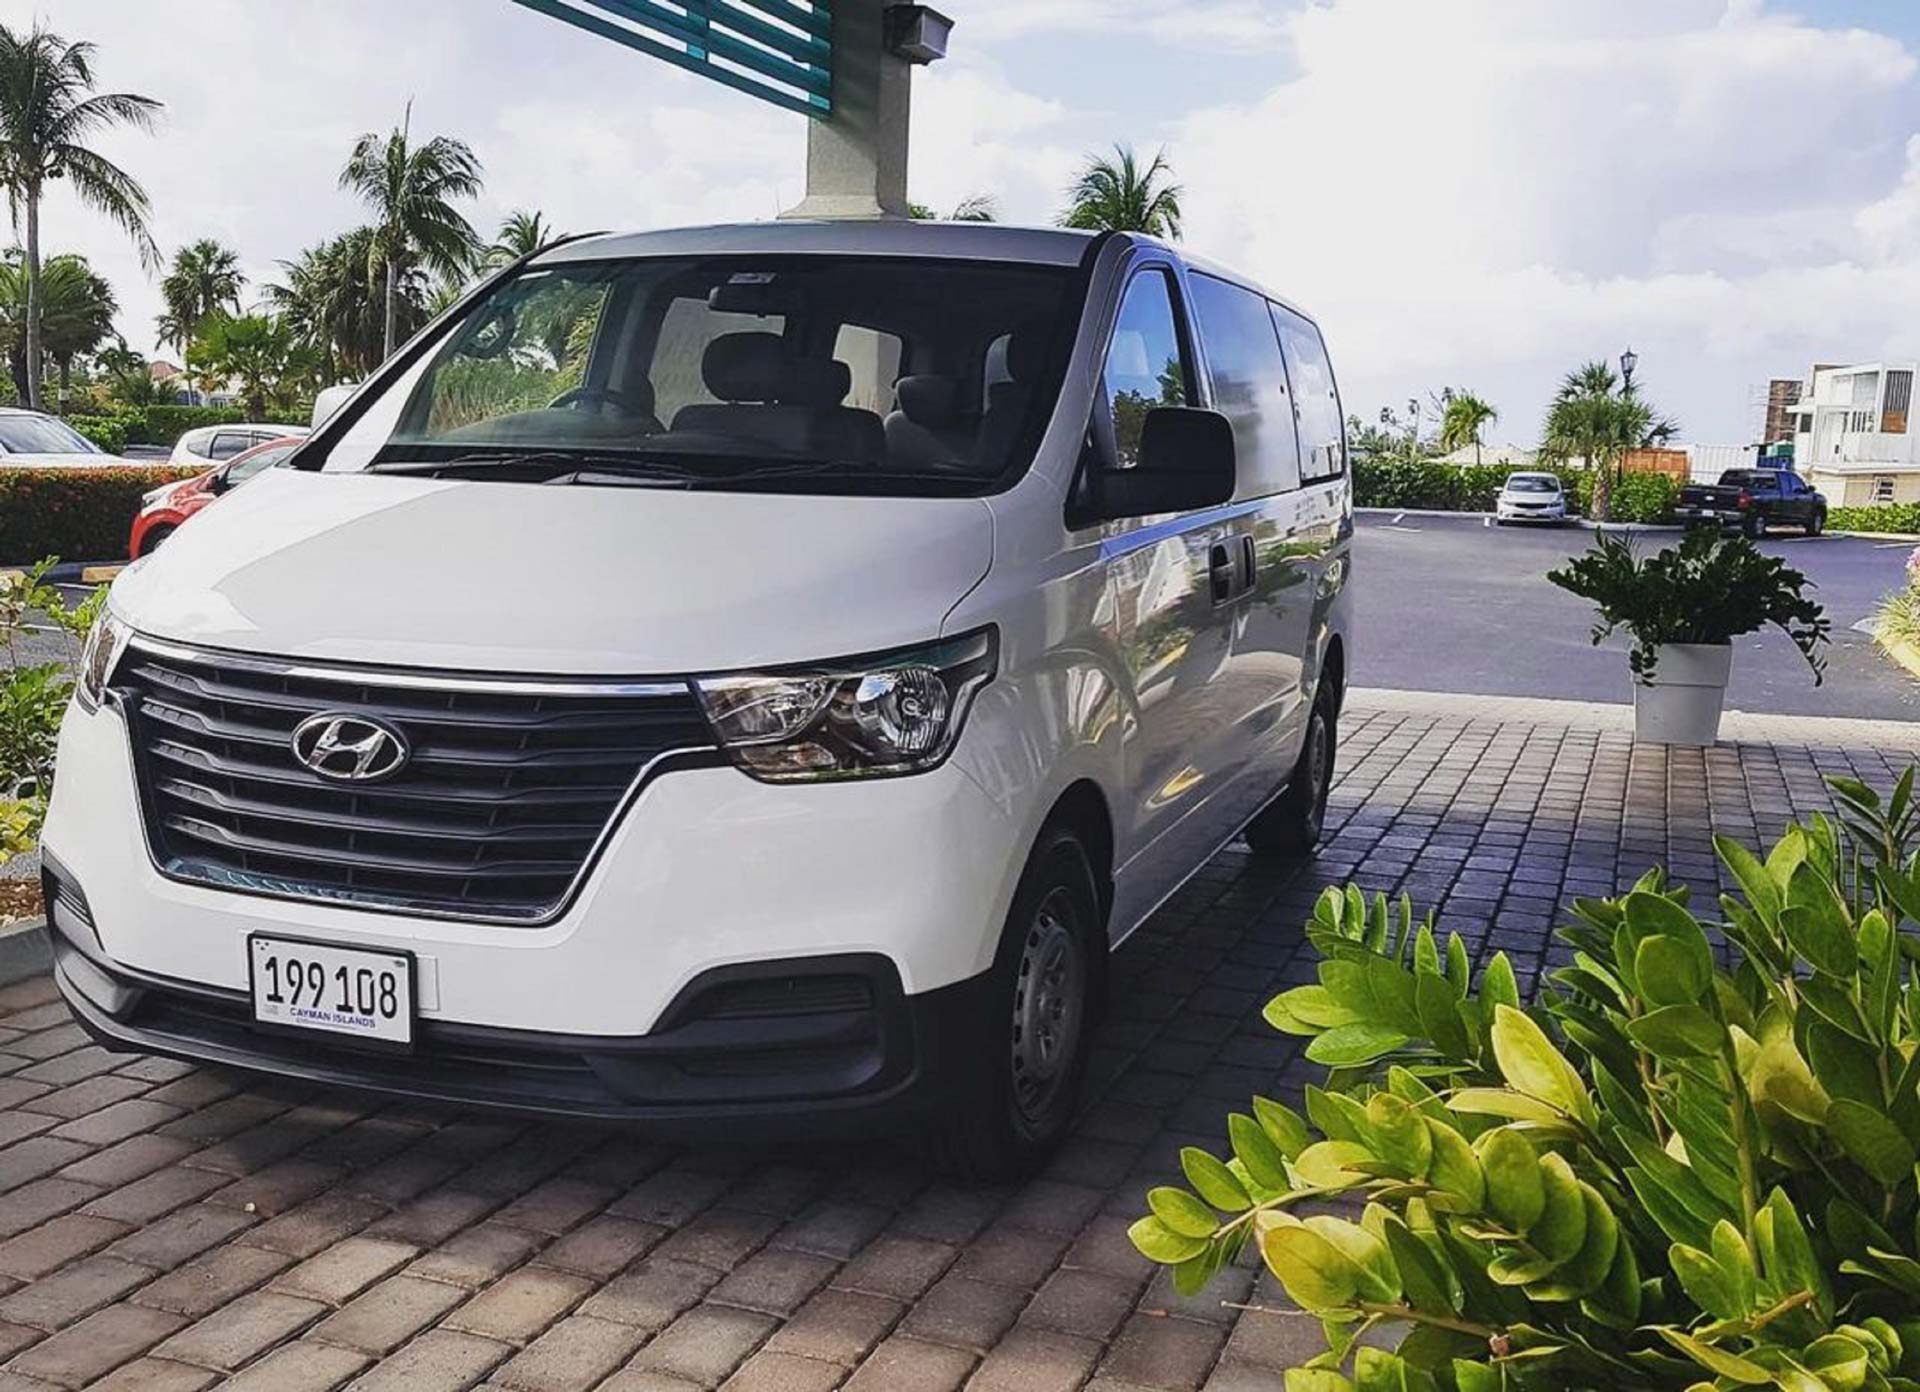 Complimentary shuttle van at the Grand Caymanian Resort.